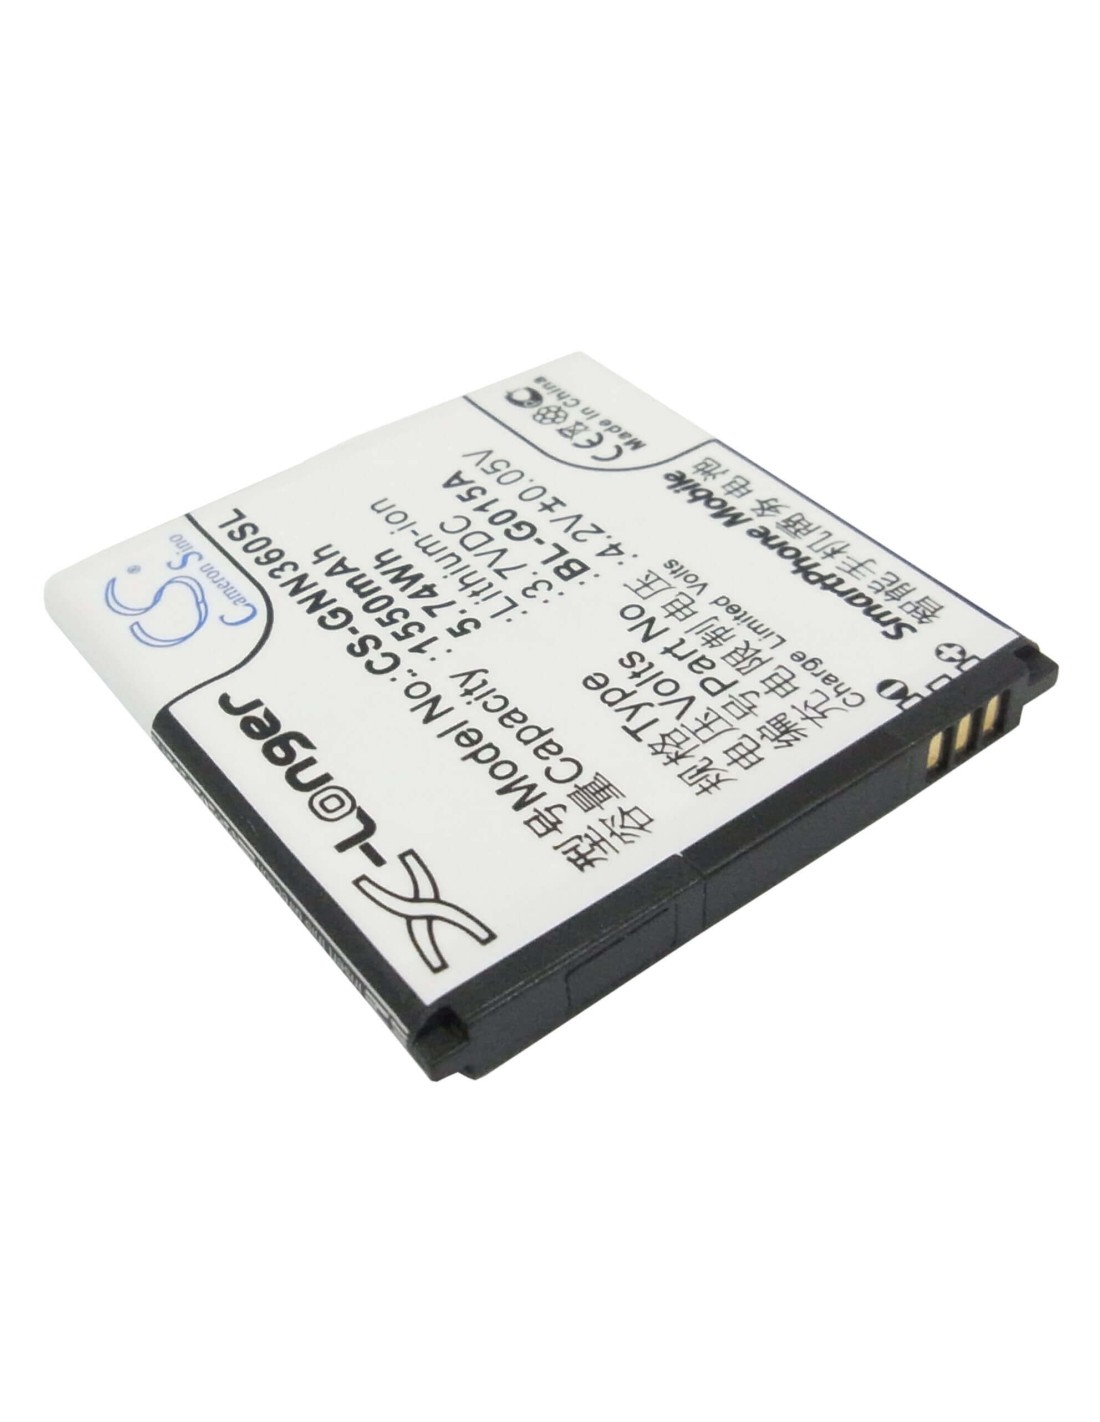 Battery for GIONEE GN305, GN108, GN205H 3.7V, 1550mAh - 5.74Wh